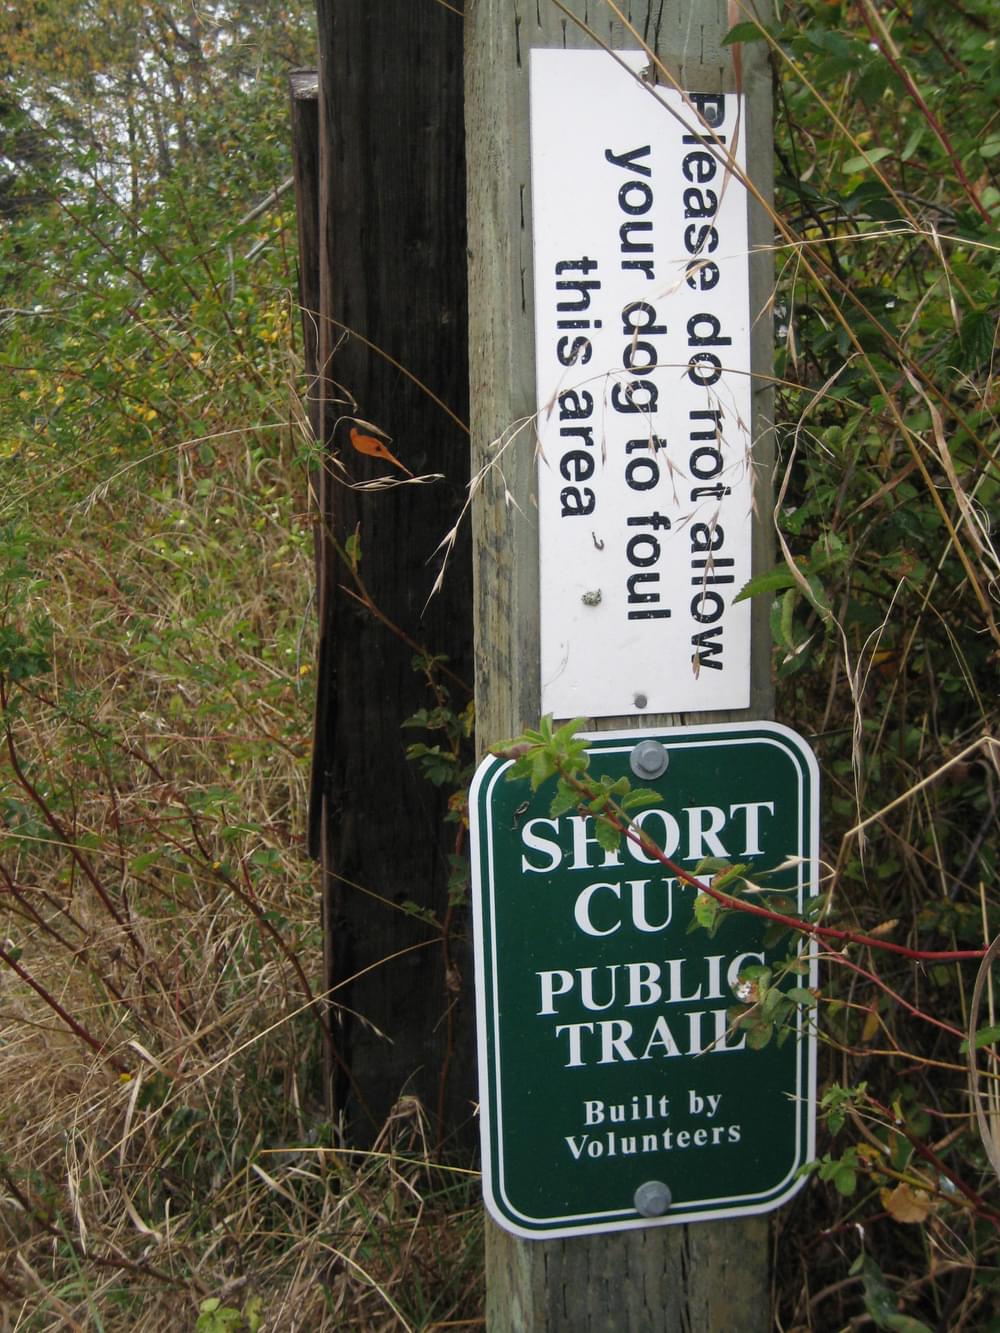 Strong words for dog owners on a trail in Port Townsend, Washington